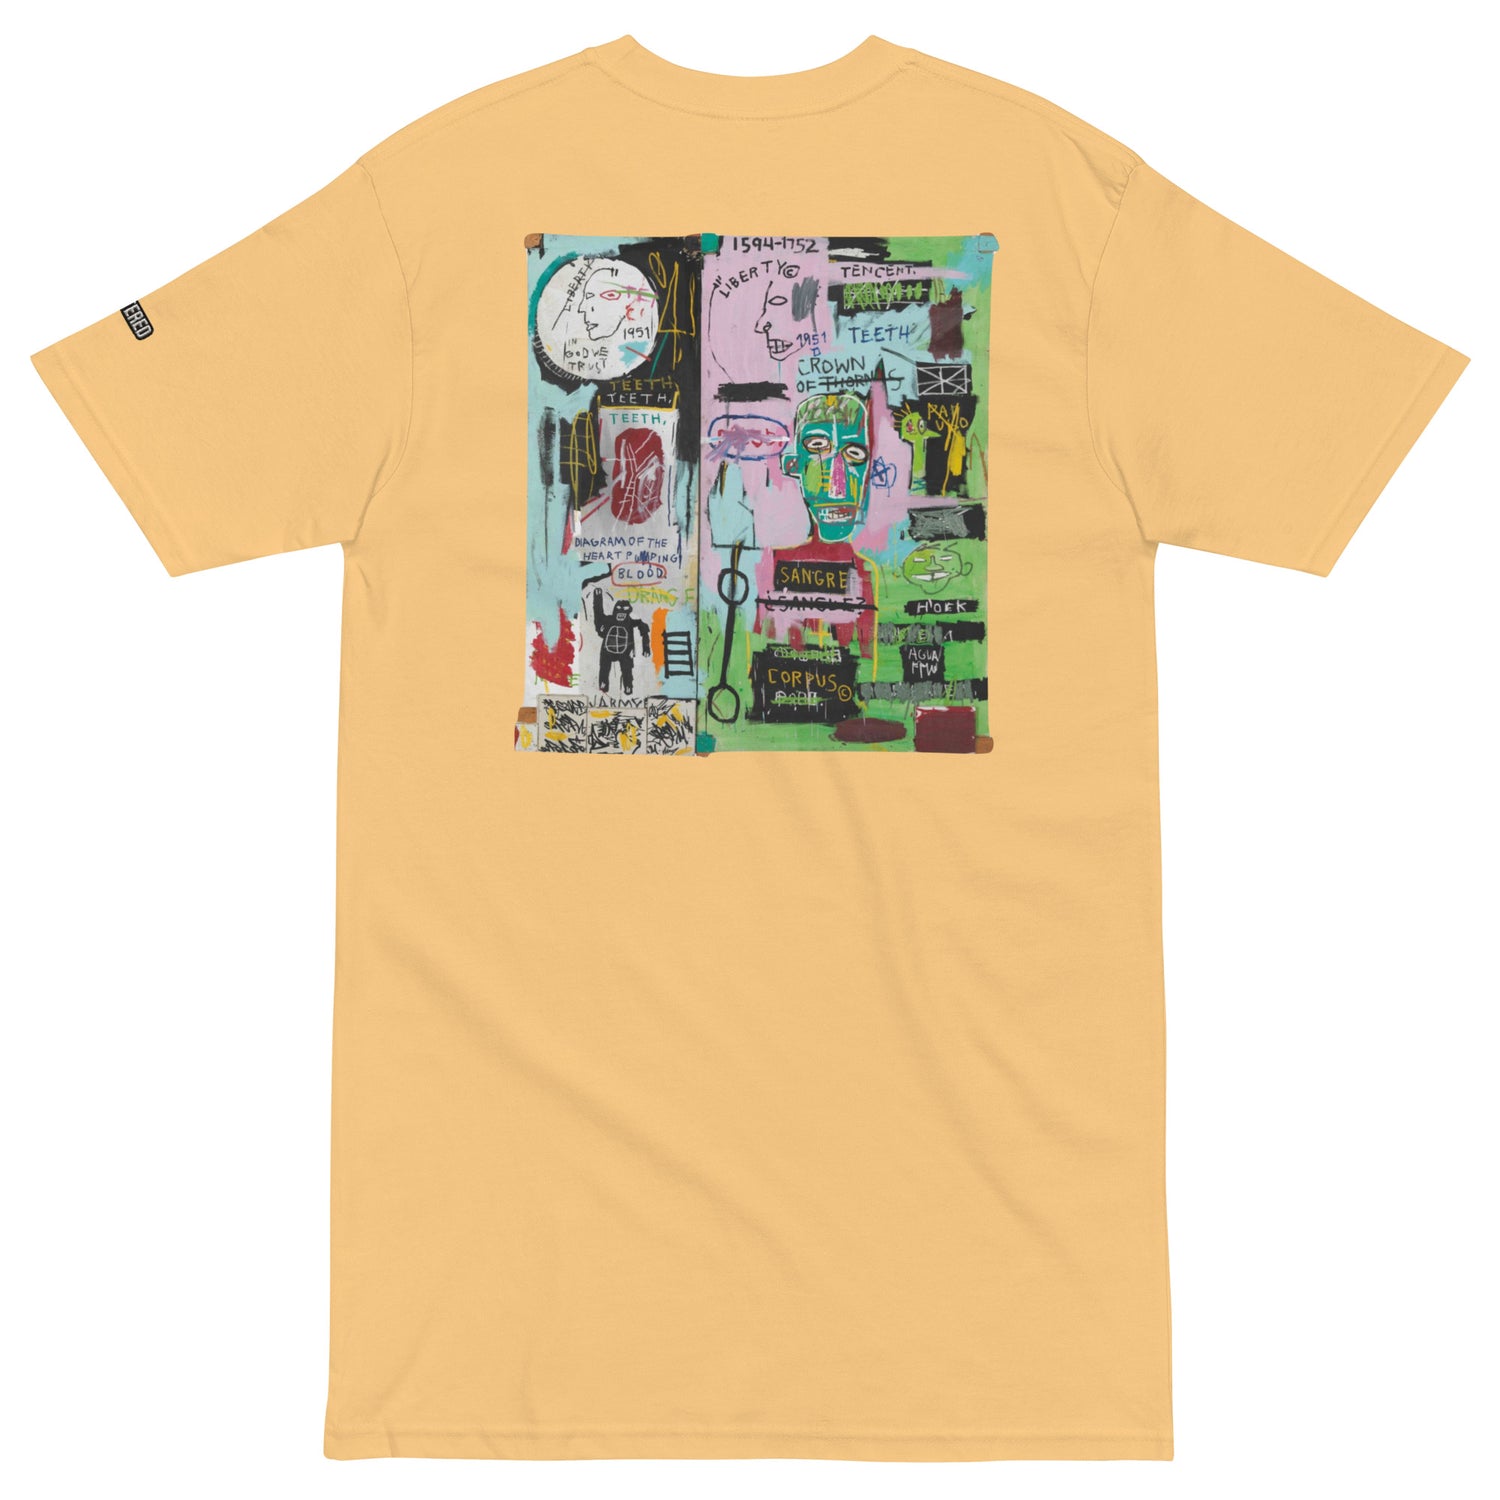 Jean-Michel Basquiat "In Italian" Artwork Embroidered and Printed Premium Yellow Streetwear T-Shirt Scattered